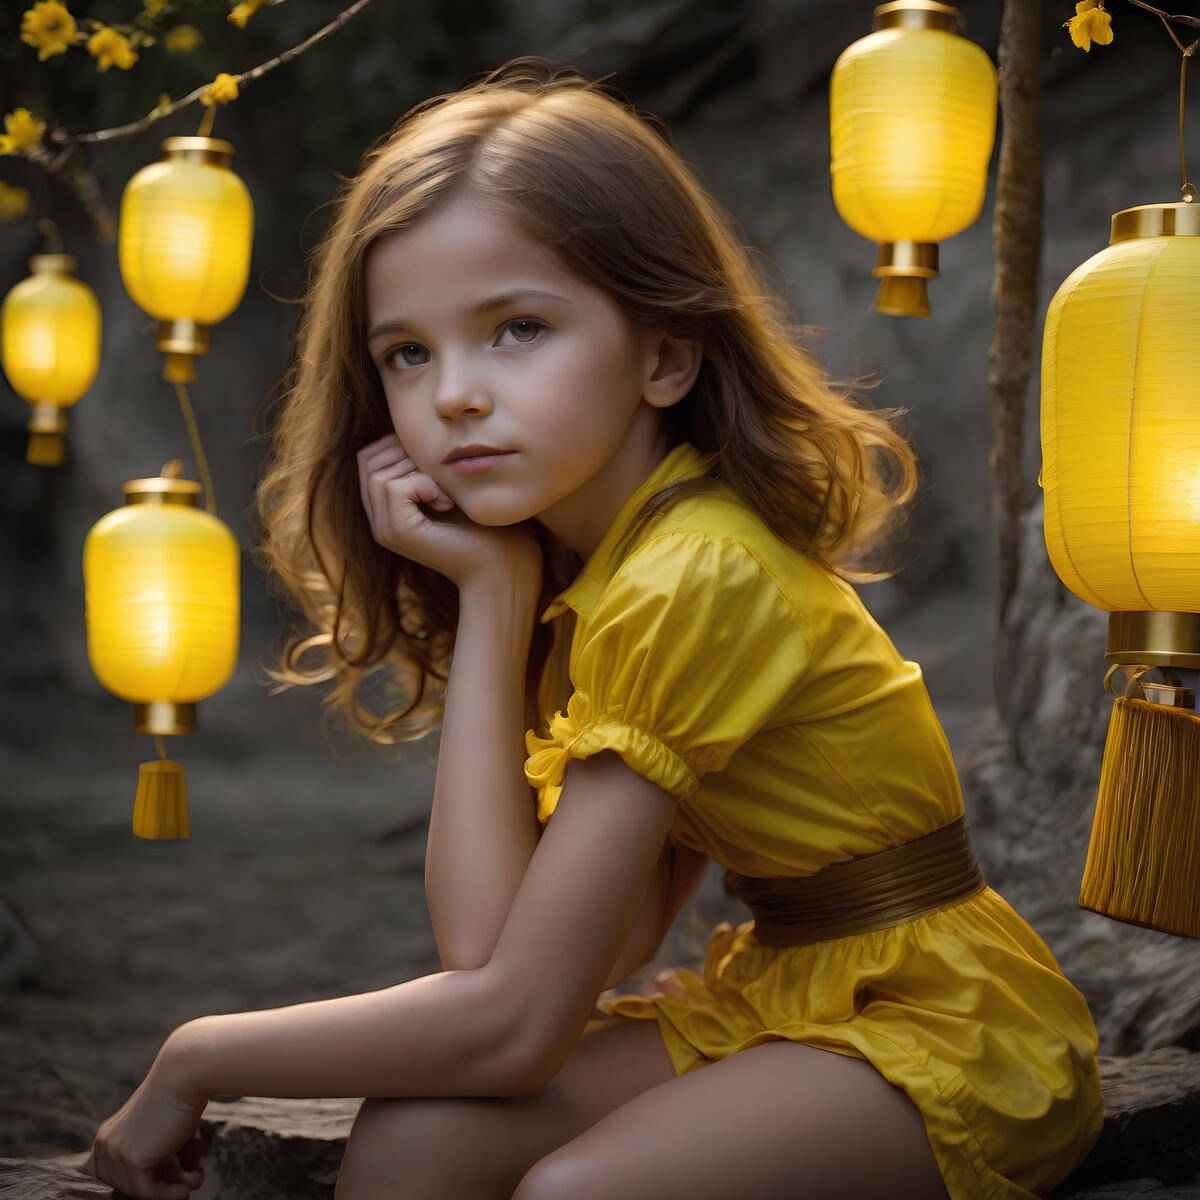 The girl and the yellow lanterns